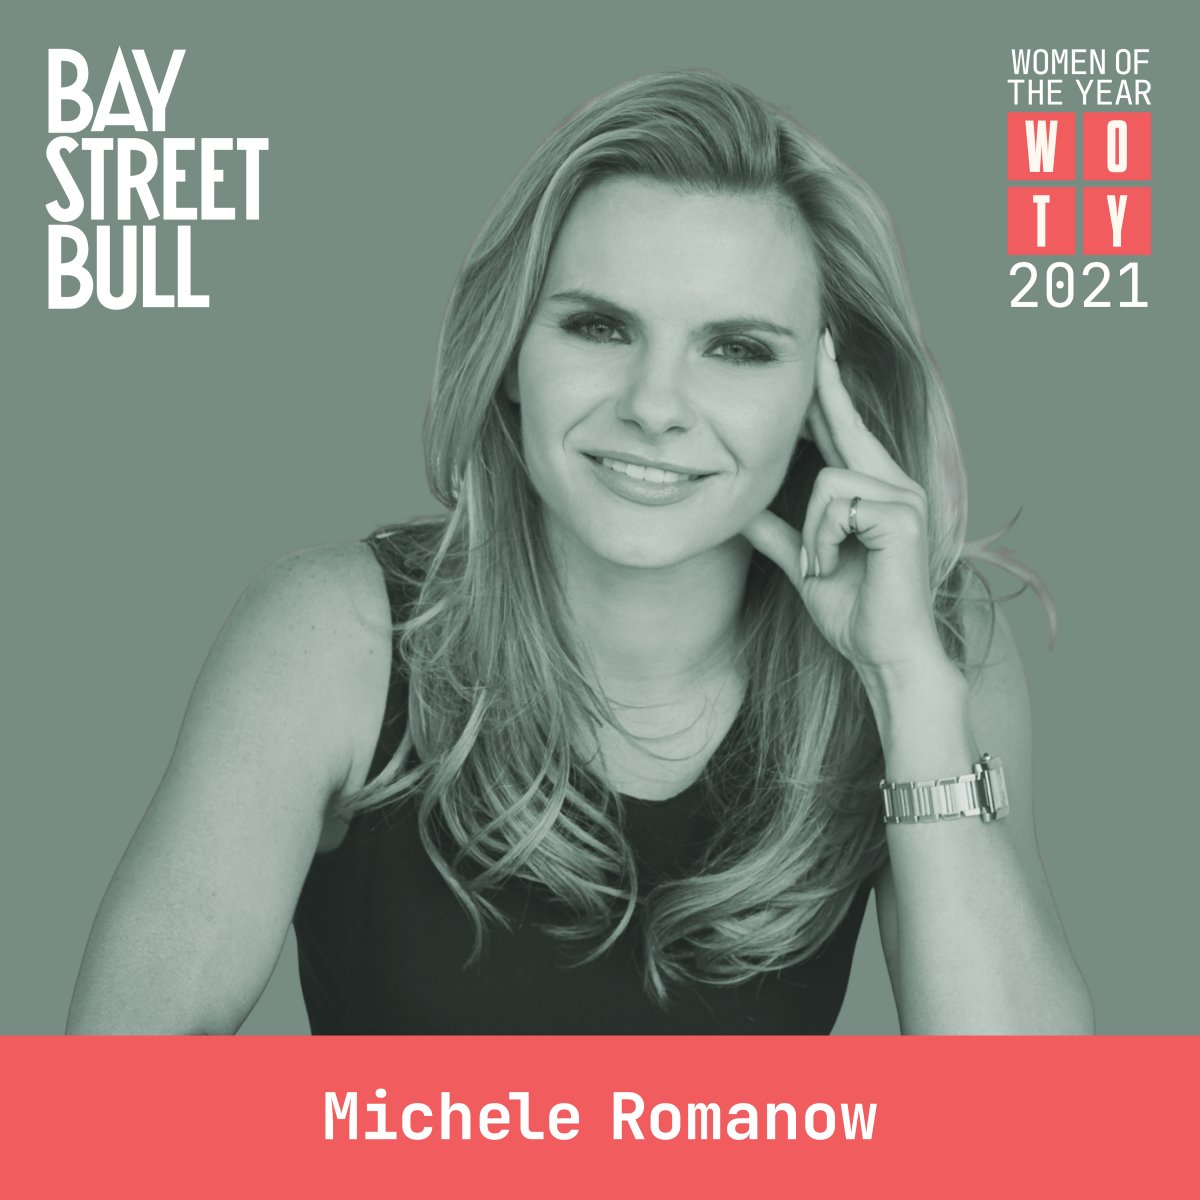 black and white photo of Michele Romanow wearing black top